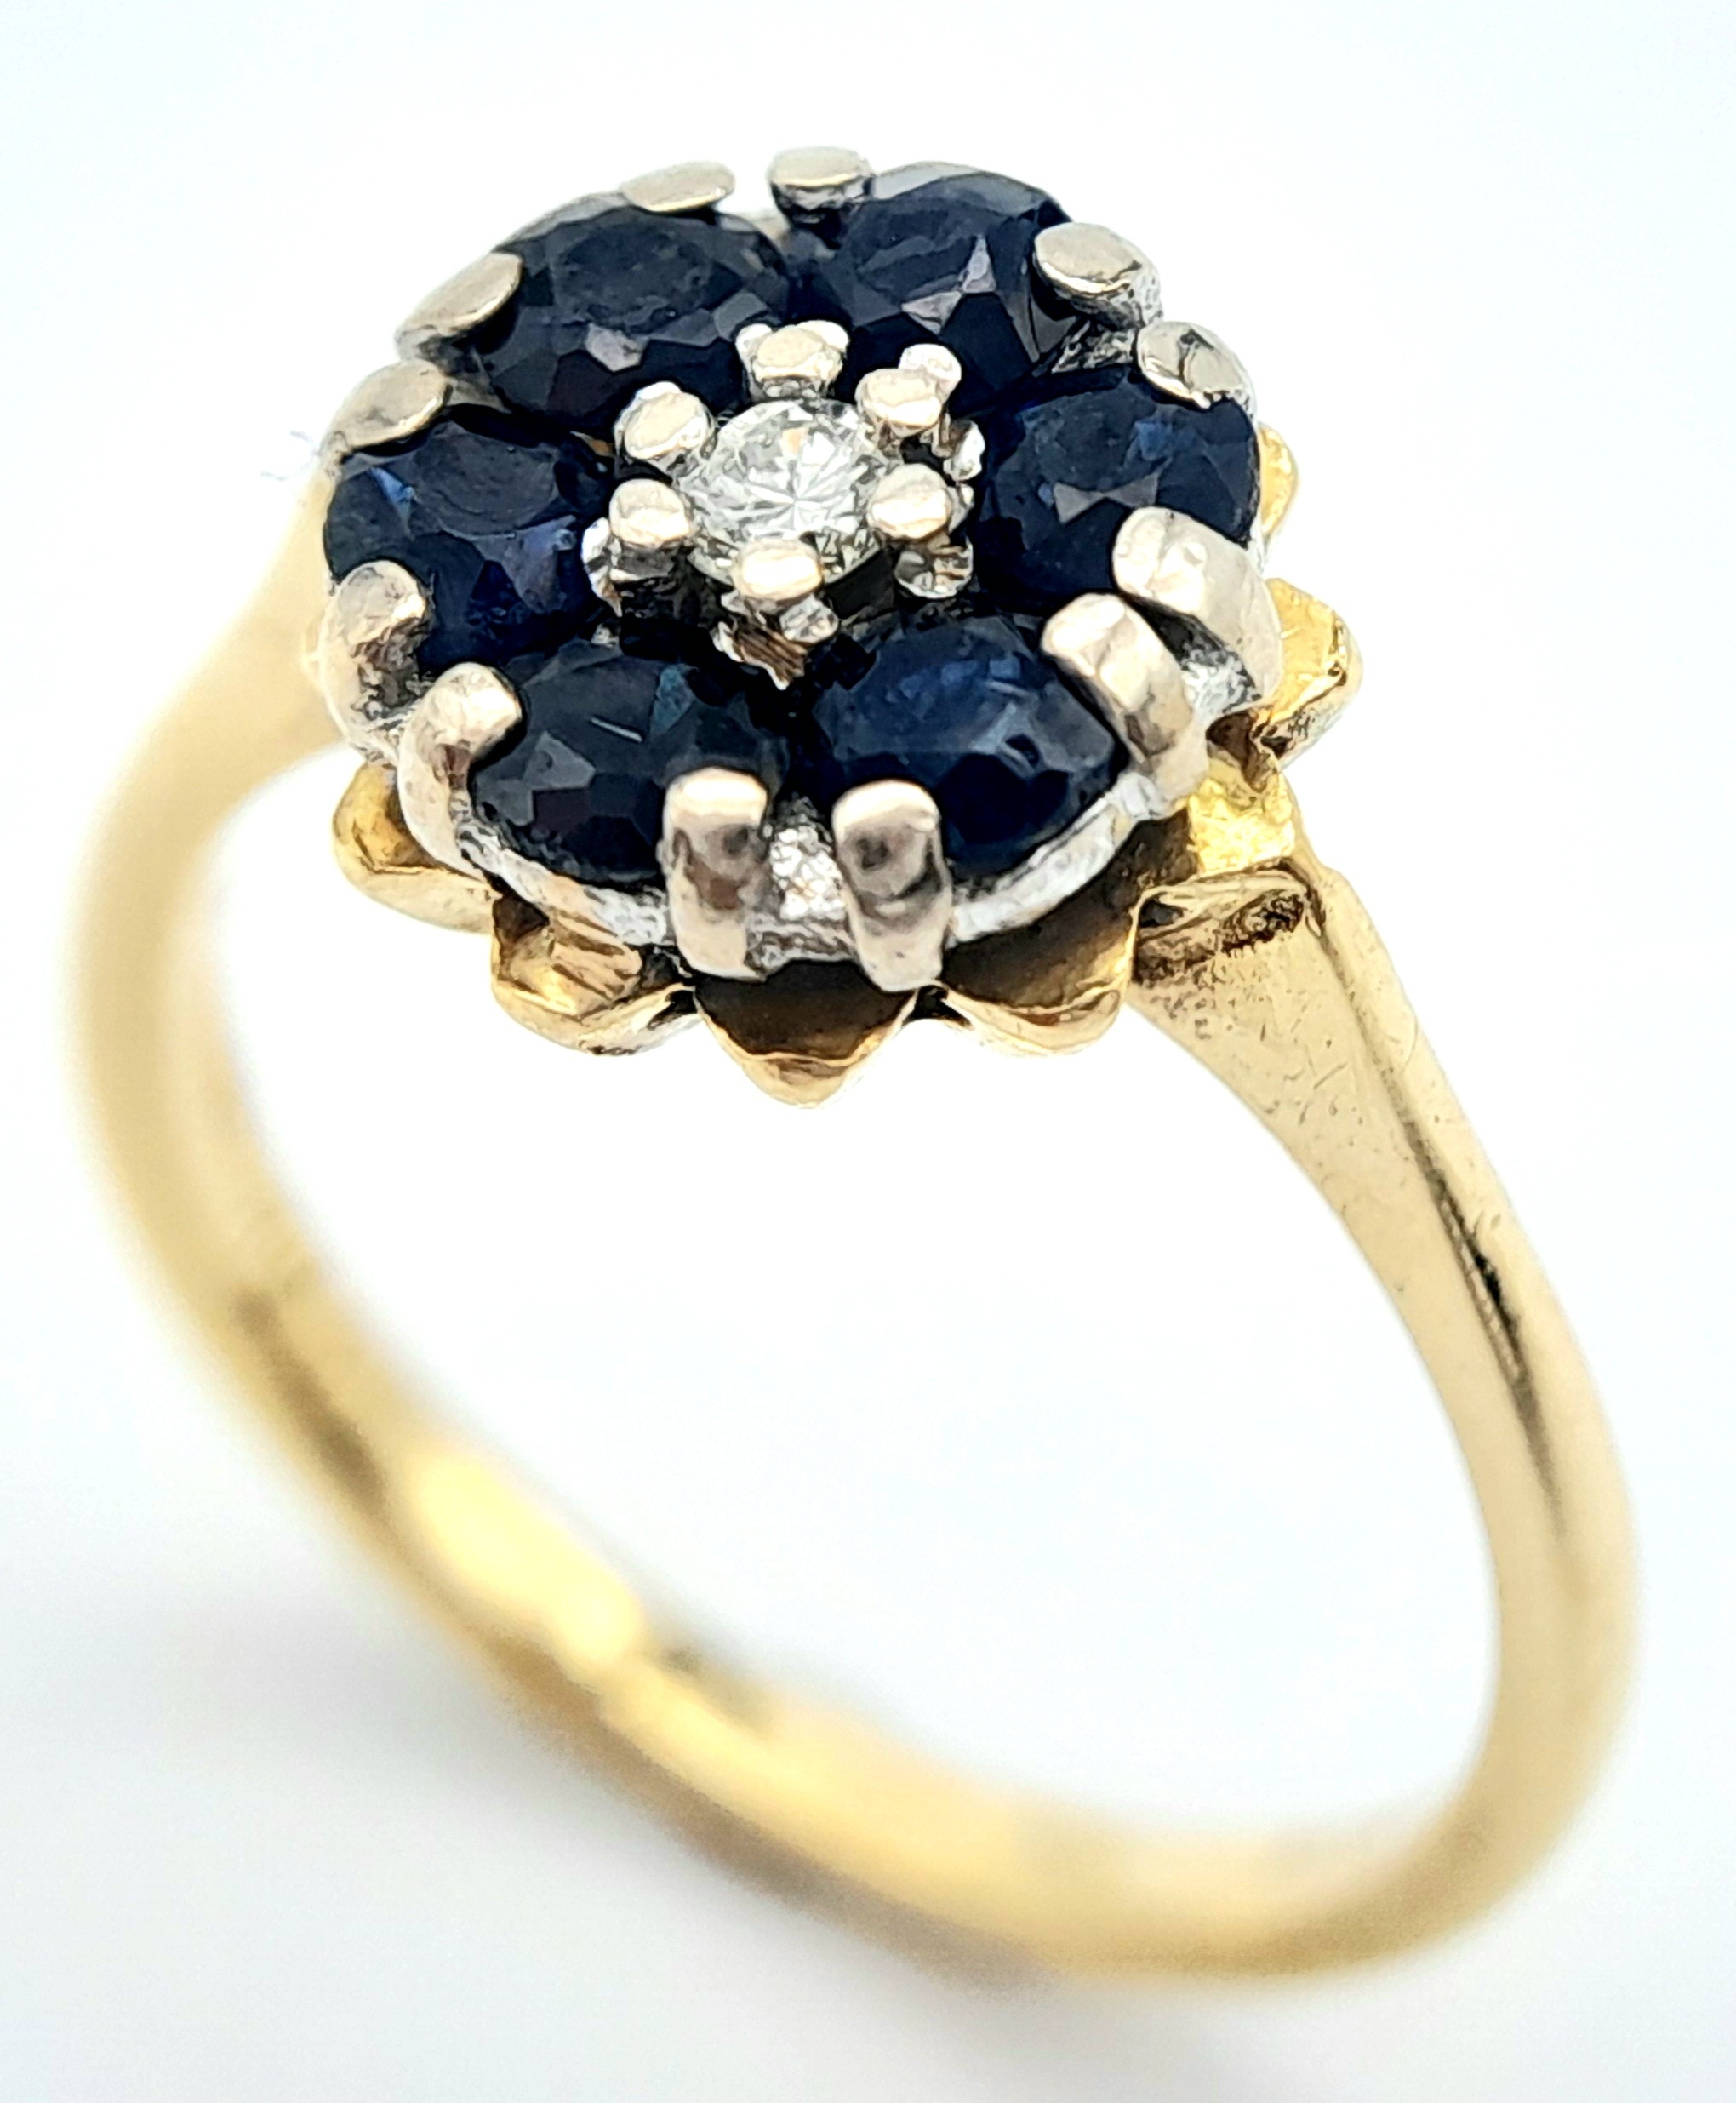 AN 18K YELLOW GOLD VINTAGE DIAMOND & SAPPHIRE RING. Size K, 3.5g total weight. Ref: SC 8070 - Image 2 of 6